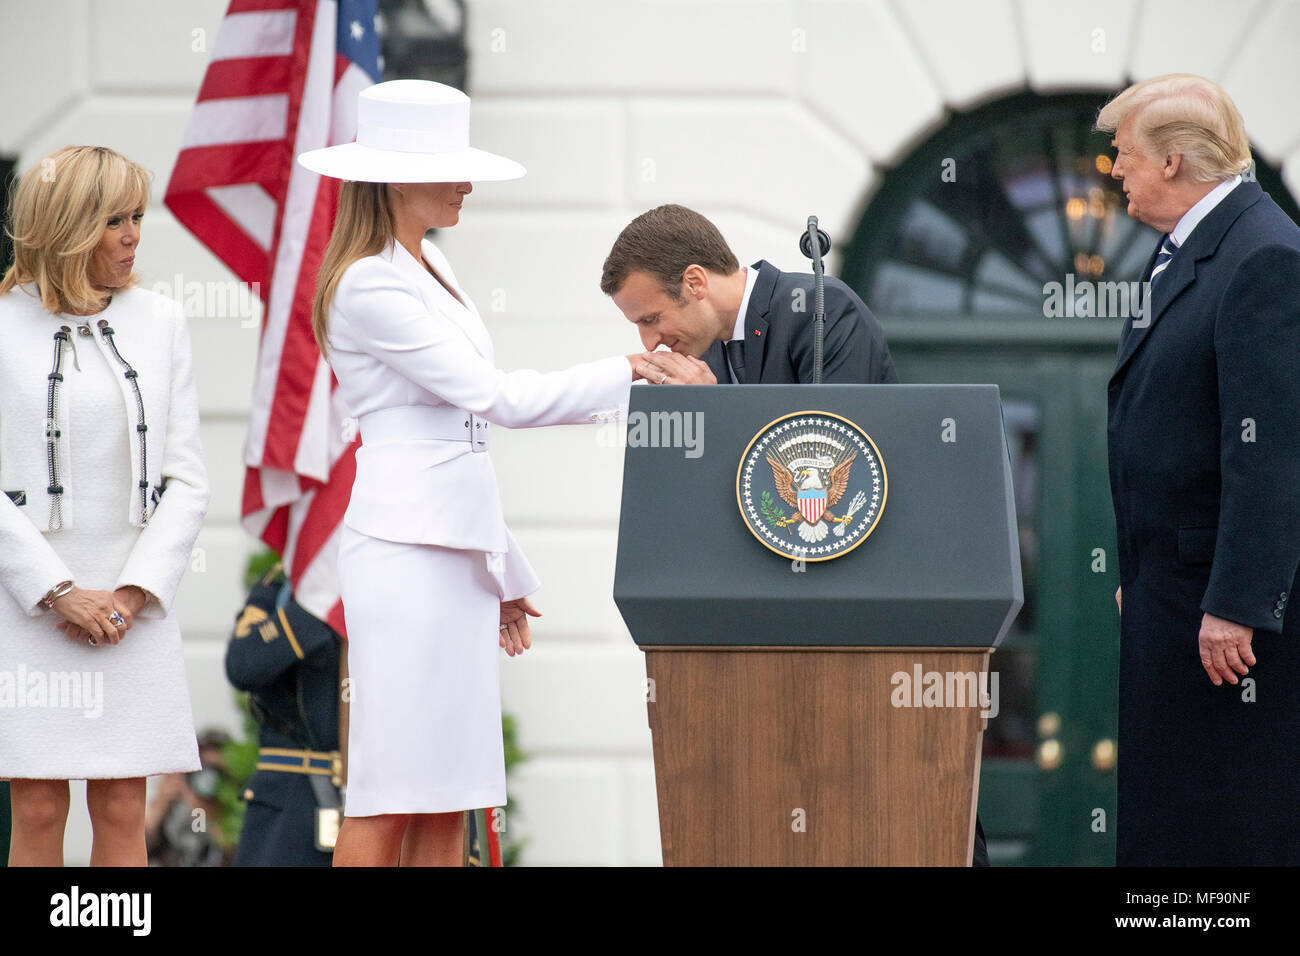 President Emmanuel Macron of France kisses the hand of first lady Melania  Trump during an arrival ceremony on the South Lawn of the White House in  Washington, DC on Tuesday, April 24,